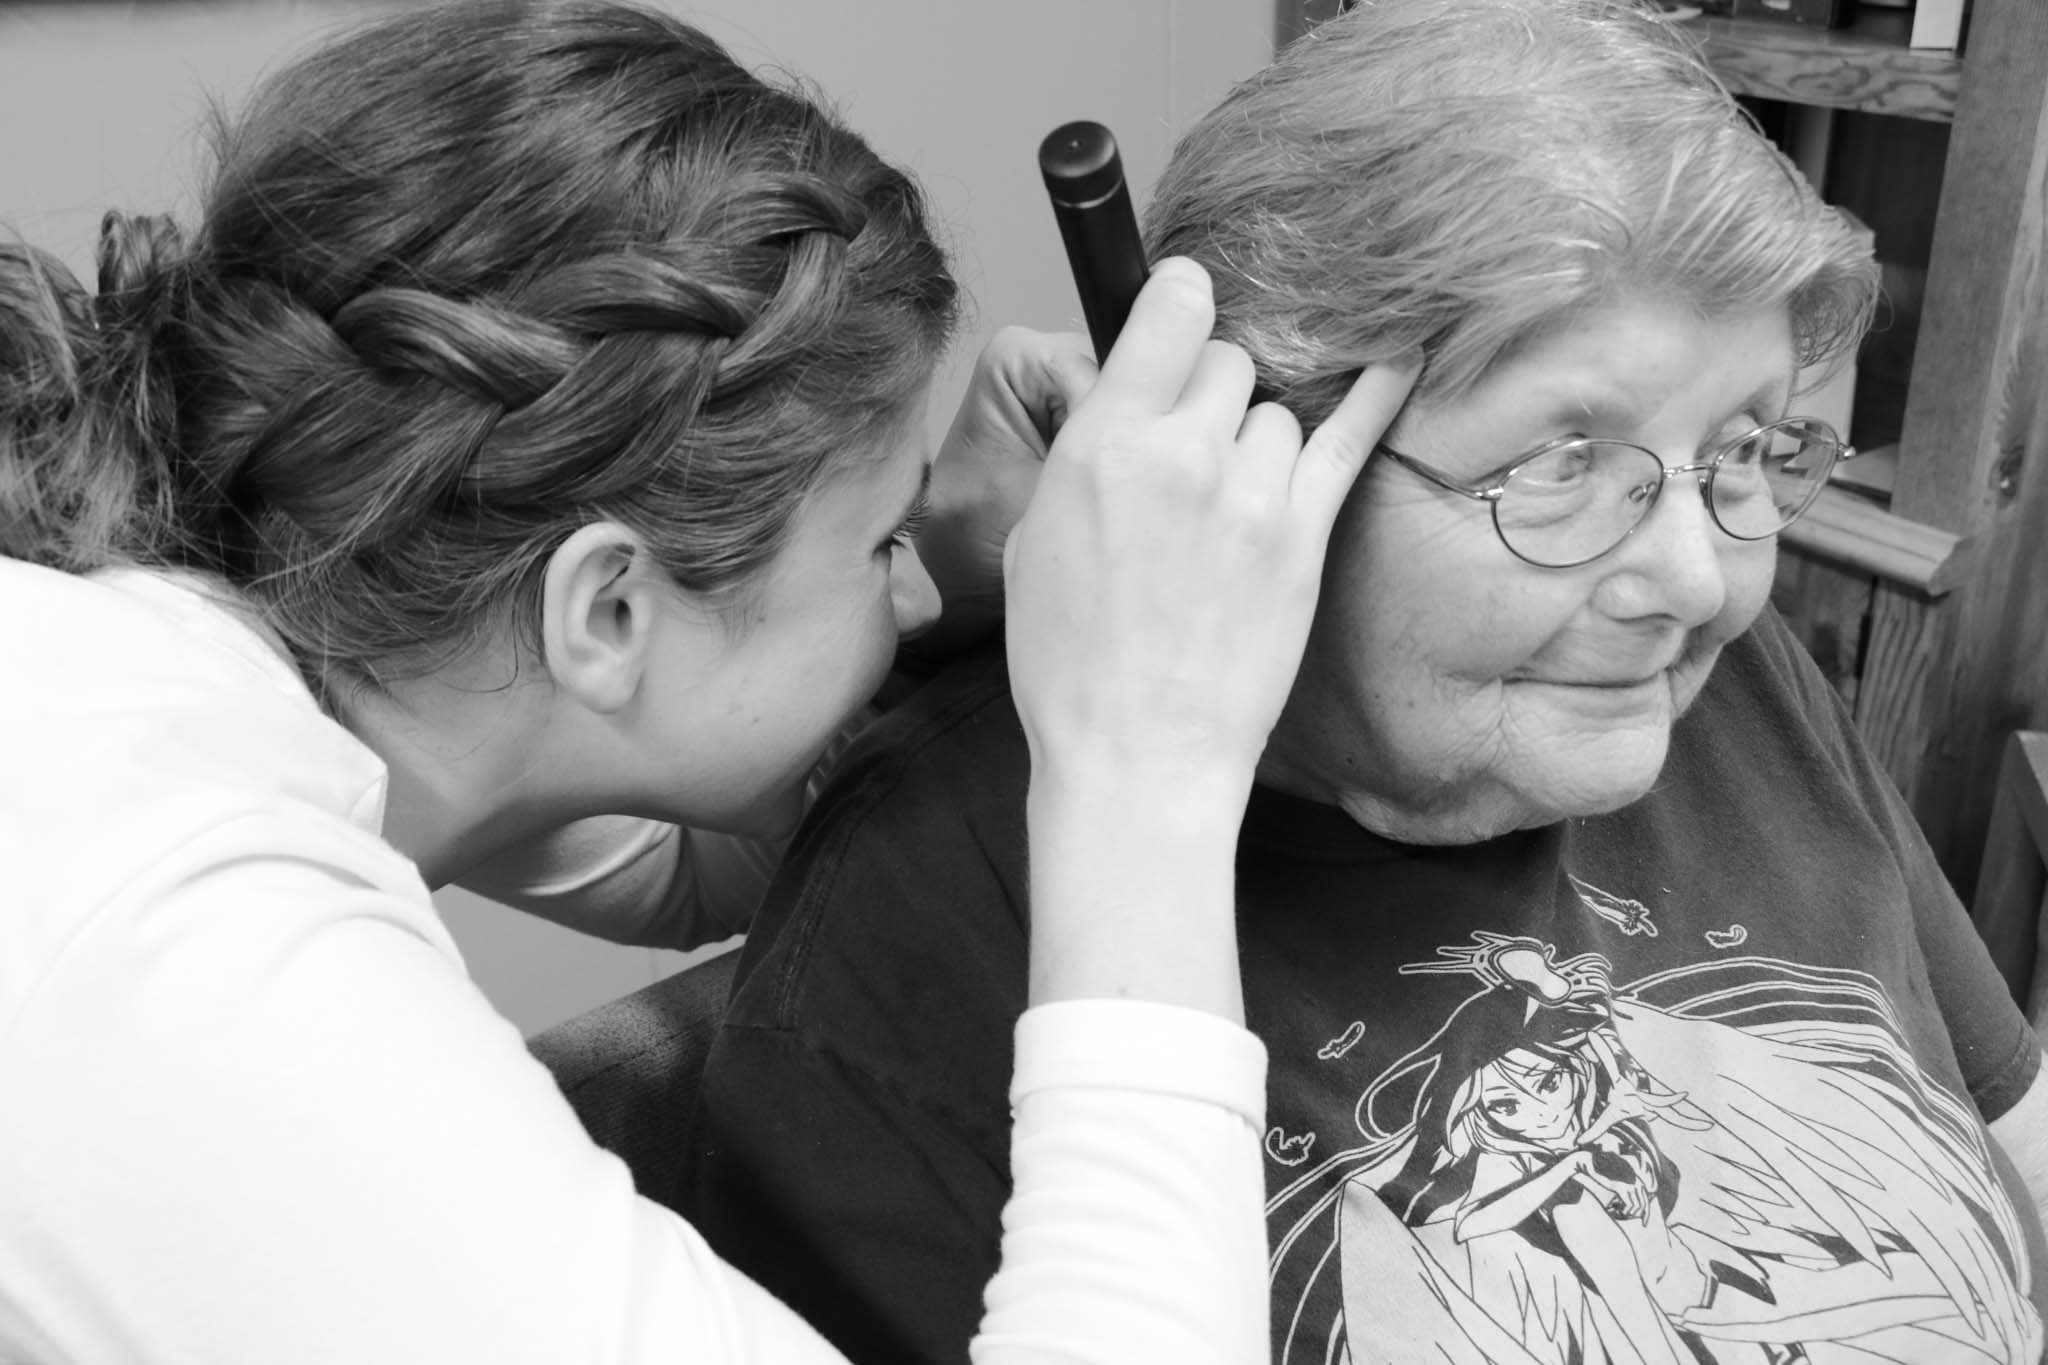 A doctor examining a patient's ear.